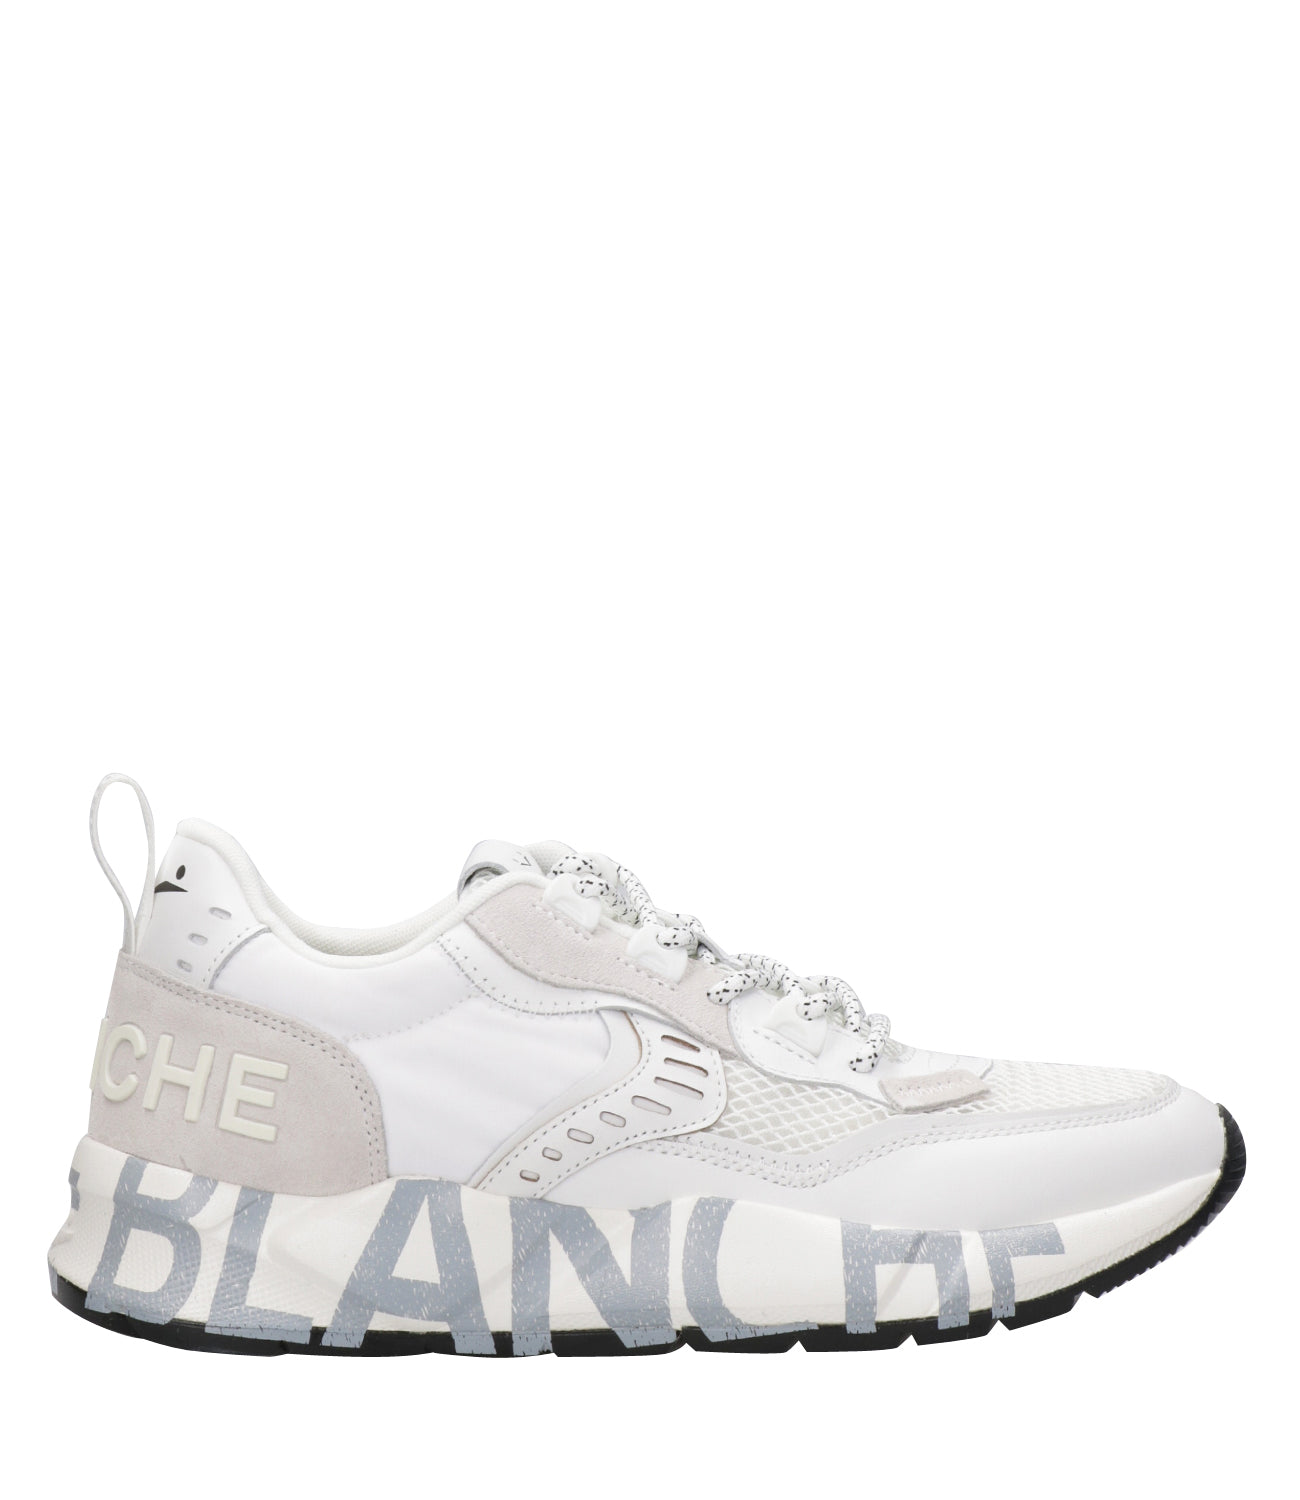 Voile Blanche | Sneakers Club01 Bianco